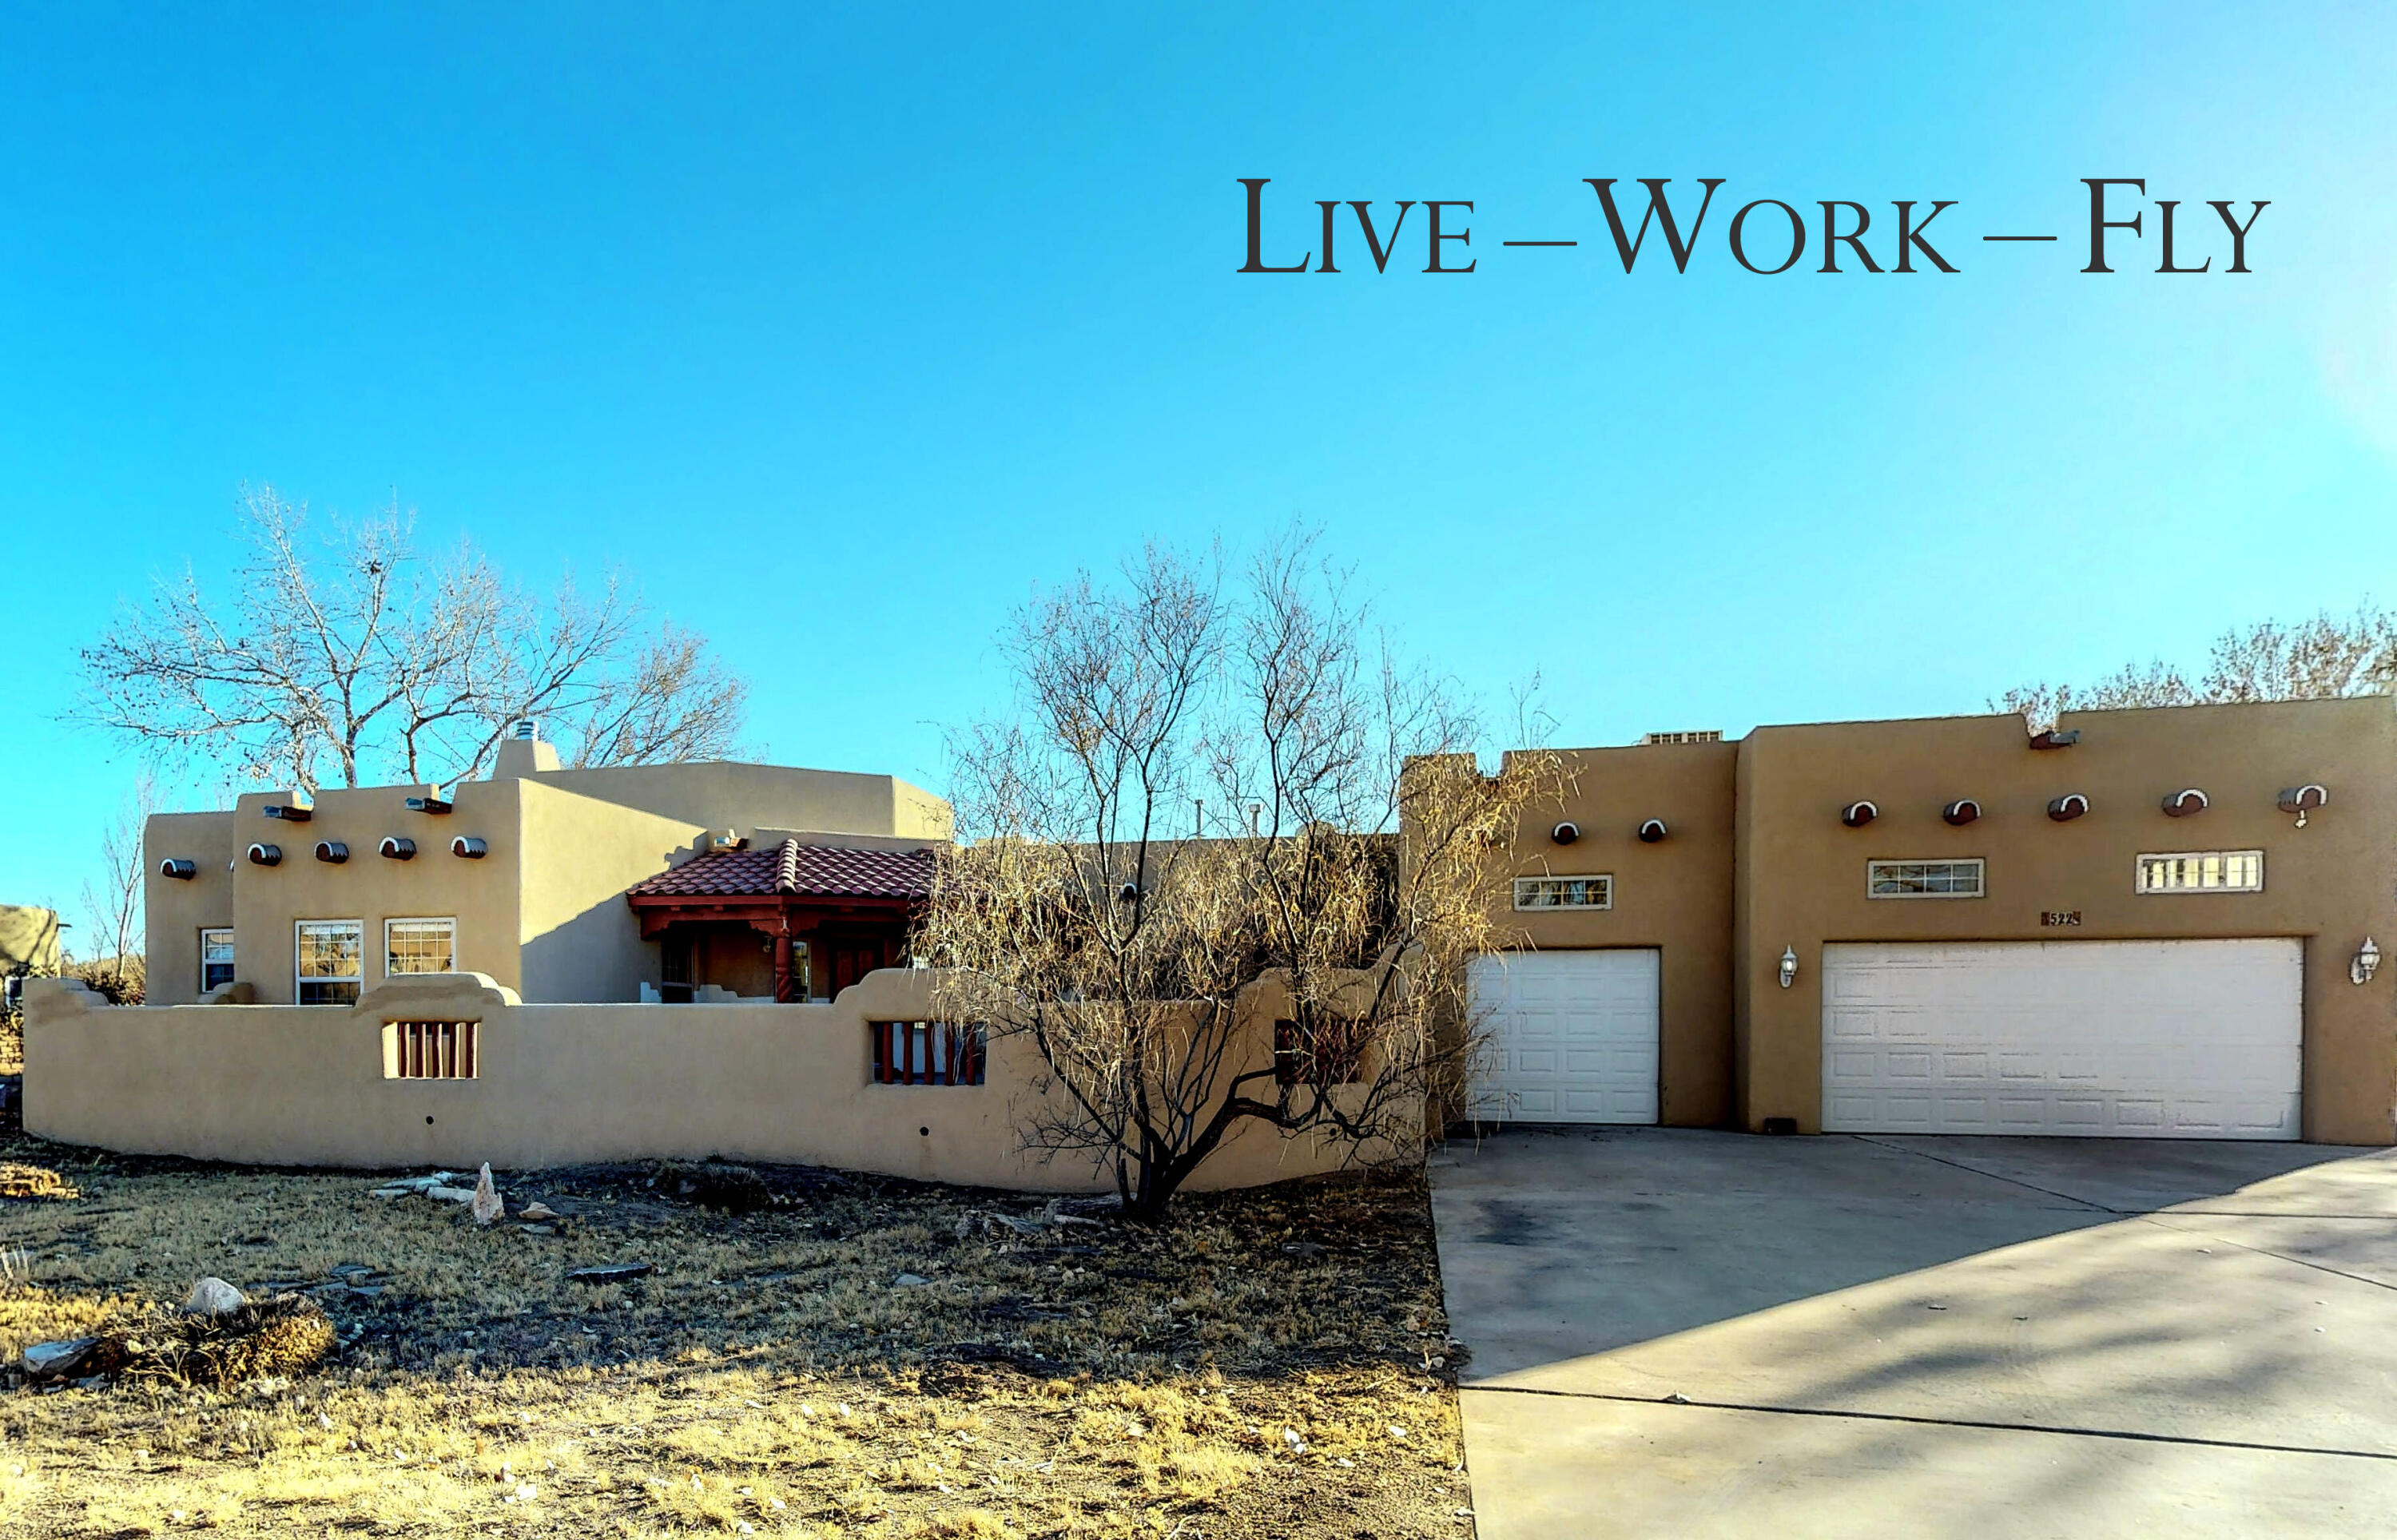 Live, Work and Fly from Home. Stunning custom, southwestern, pueblo style home situated on almost an acre in the desirable Mid-Valley Airpark community (E98). This single-story home features 3 bedrooms, 2.5 baths, an office, attached 1270 sf 5 car garage/hangar with its own bathroom and easy access to both runways. High speed fiber internet to the home through Plateau Fiber. Close to new Amazon and Facebook development, I-25, and minutes to Albuquerque. This would make a great primary or second home for anyone with an airplane, or needs a hangar as a shop for cars, toys, etc. Call your Realtor and fly in for a showing today!